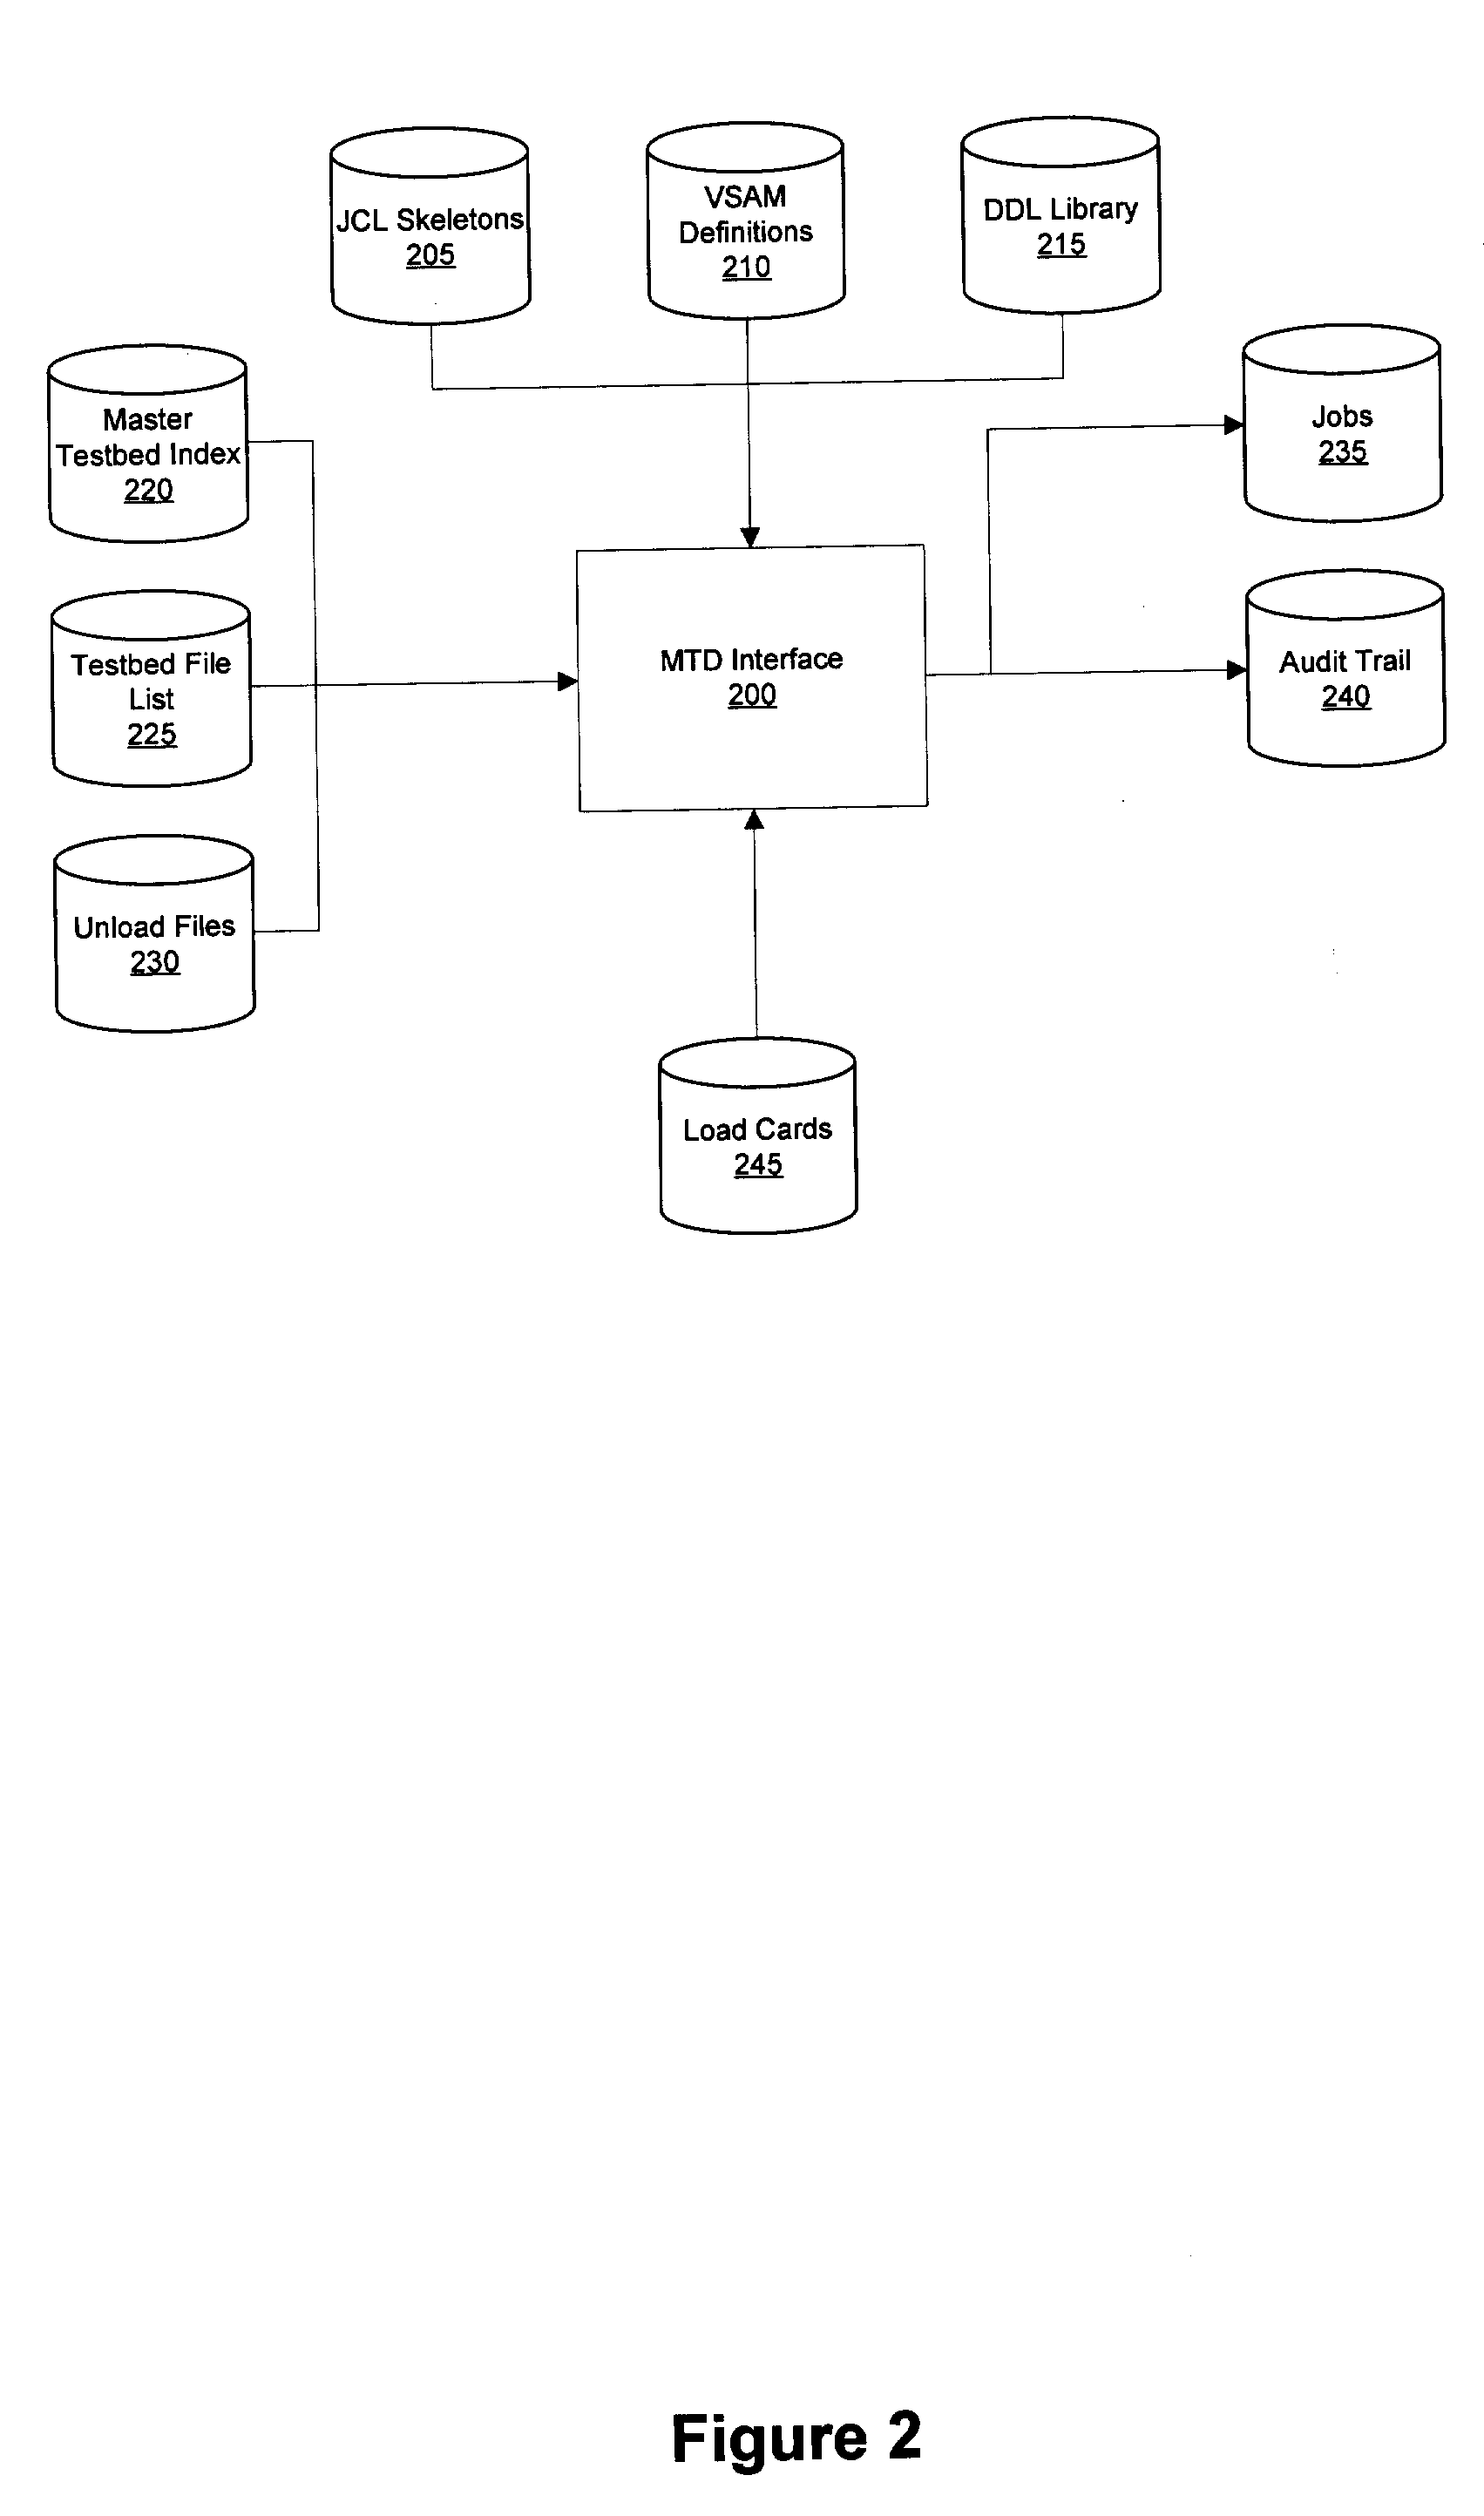 System and method for building full batch test environments